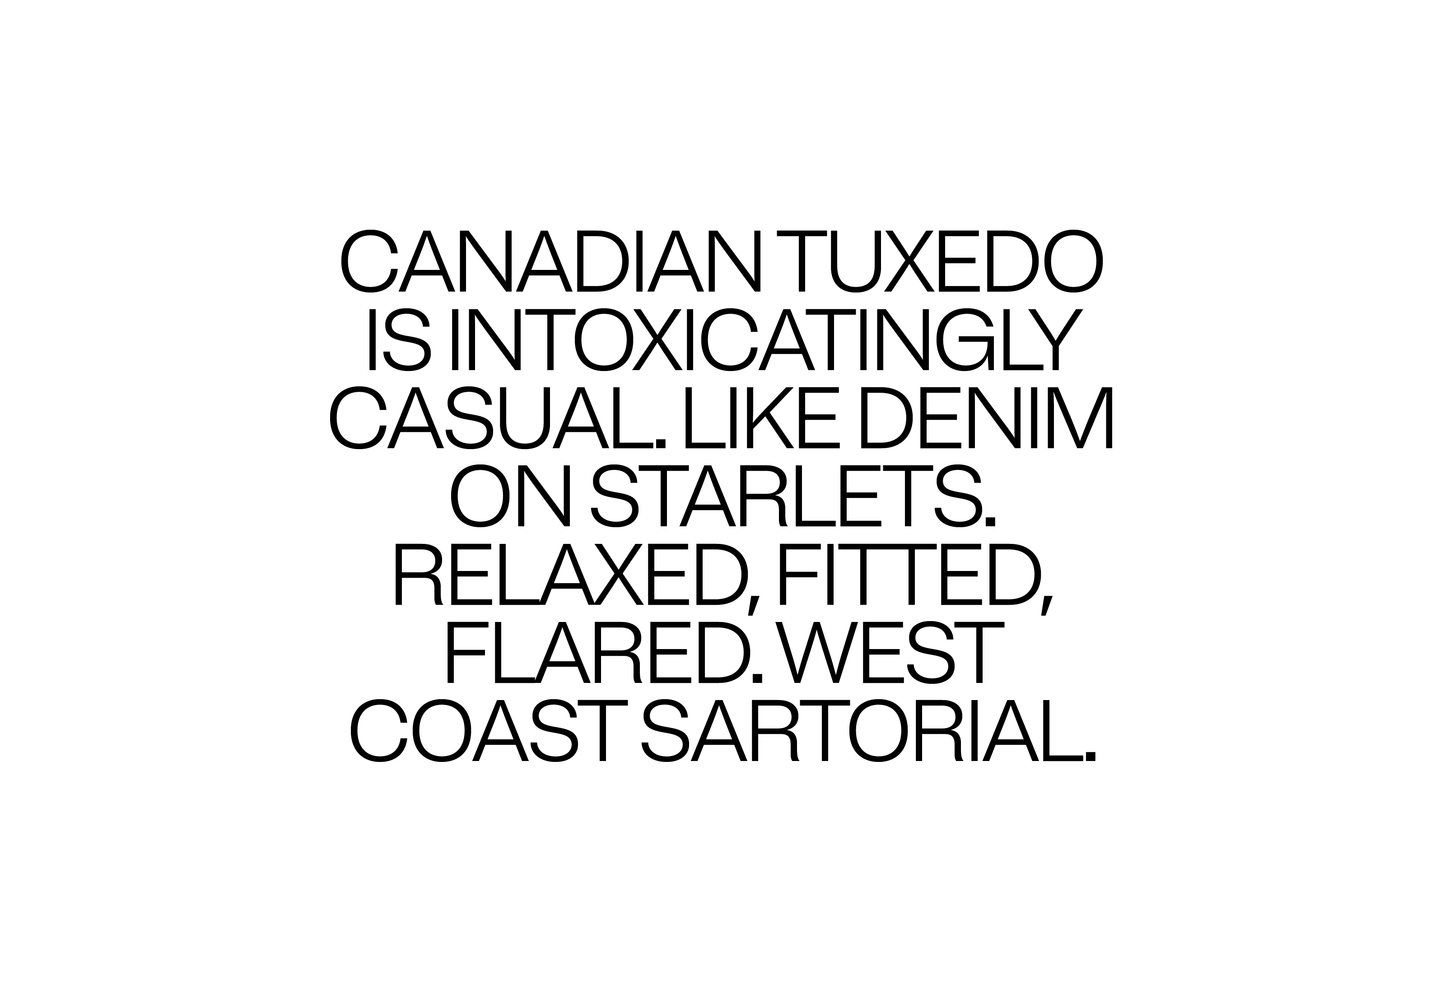 Canadian Tuxedo is intoxicatingly casual. Like denim on starlets. Relaxed, fitted, flared. West Coast satorial.